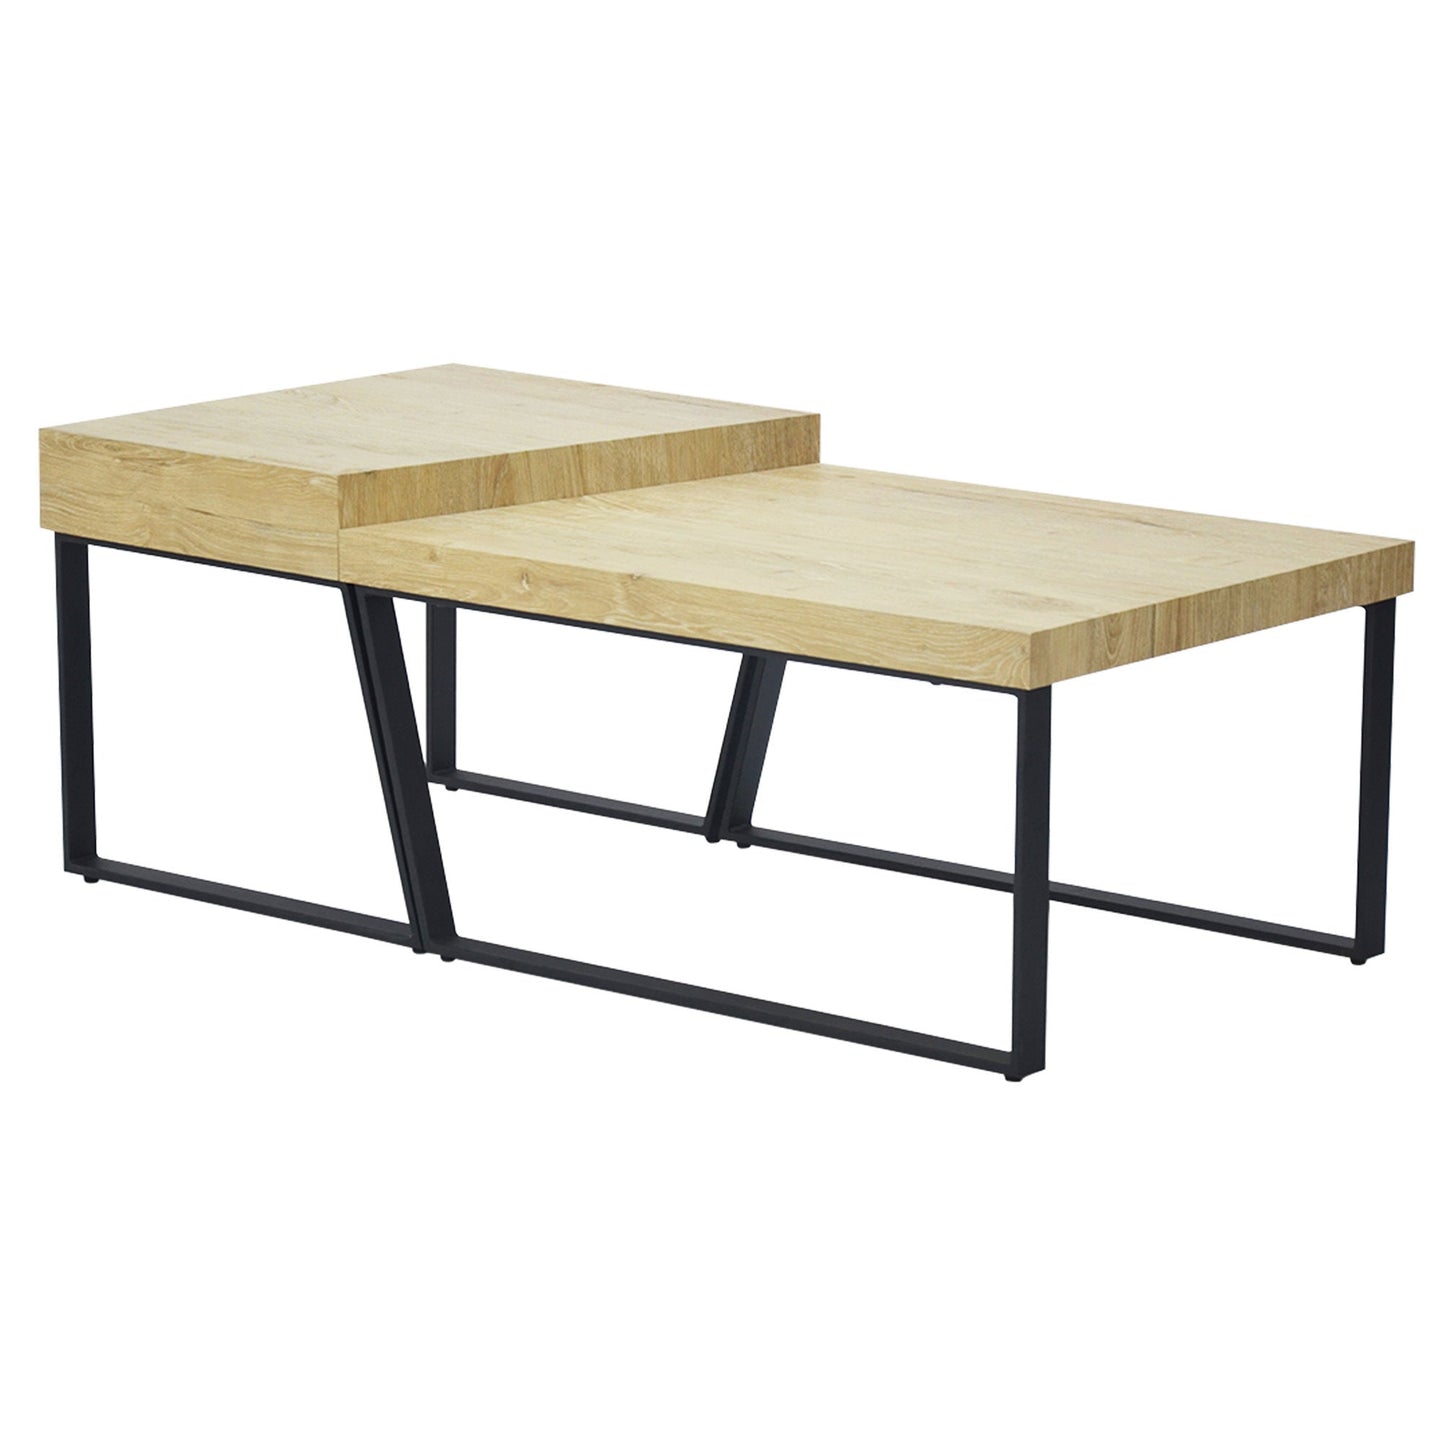 Rectangular Wooden Coffee Table with Metal Frame, Oak Brown and Black Home Decor by Design